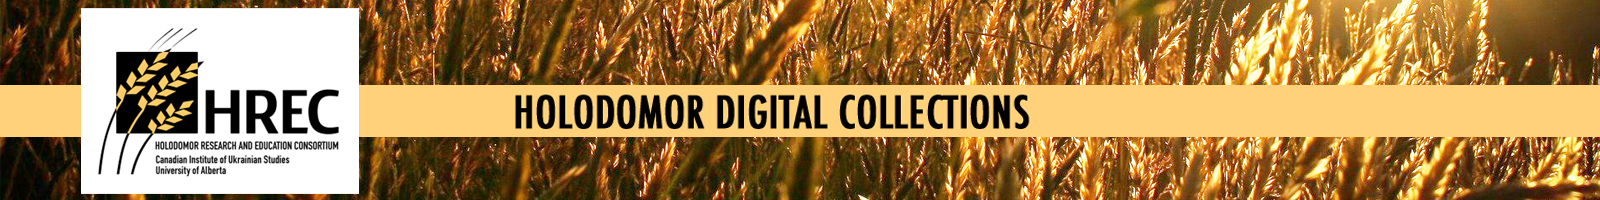 Holodomor Digital Collections